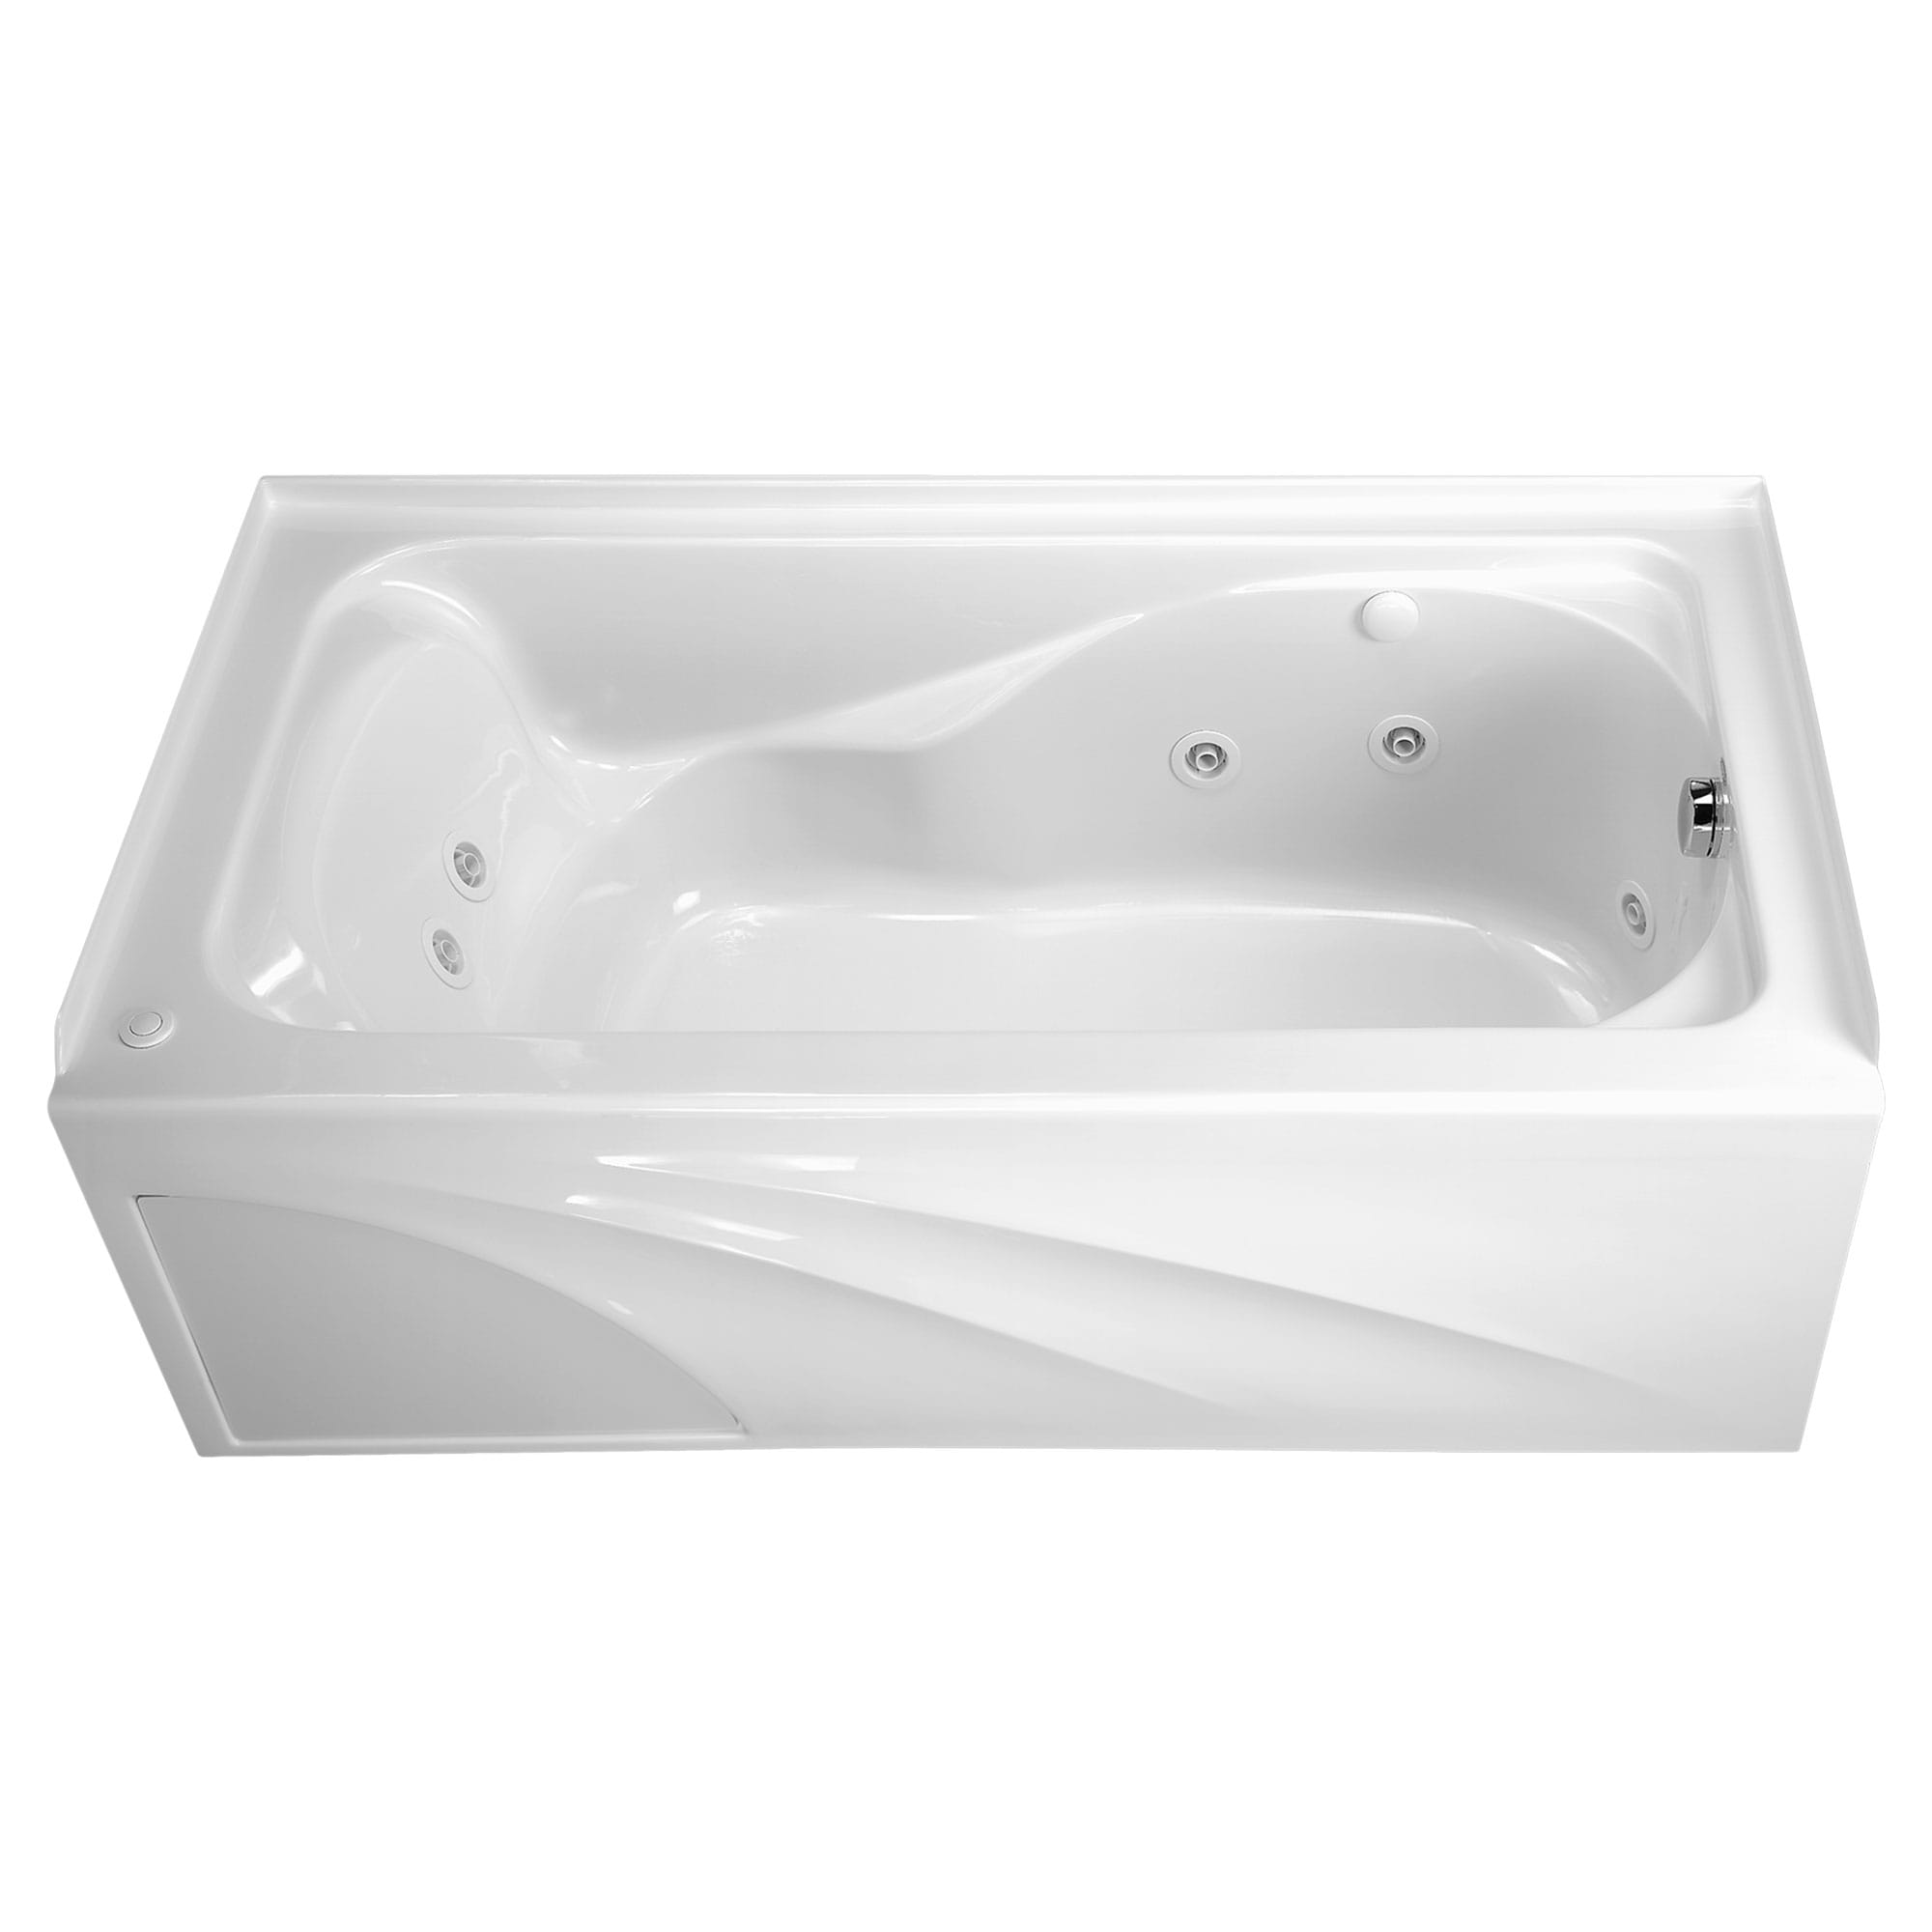 Cadet® 60 x 32-Inch Integral Apron Bathtub Right-Hand Outlet With Hydromassage System